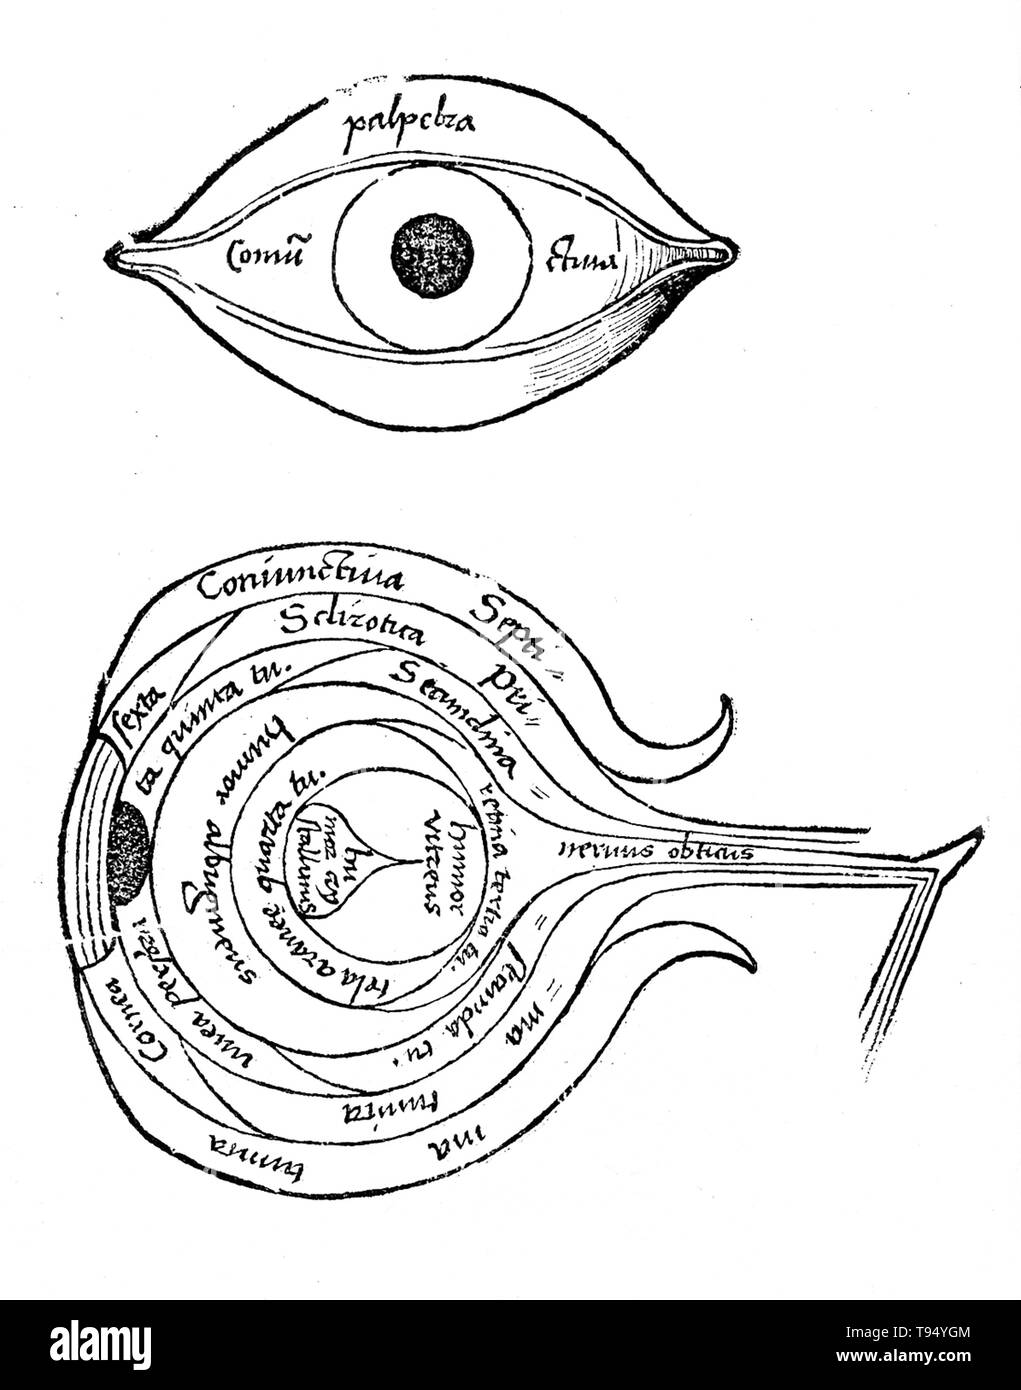 Diagram of the eye from Margarita philosophica by Gregor Reisch (1467-1525) was a German Carthusian humanist writer. His chief work is the Margarita philosophica, which first appeared at Freiburg in 1503. It is an encyclopedia of knowledge intended as a textbook for students, and contains in twelve books Latin grammar, dialectics, rhetoric, arithmetic, music, geometry, astronomy, physics, natural history, physiology, psychology, and ethics. The usefulness of the work was increased by numerous woodcuts and a full index. Stock Photo